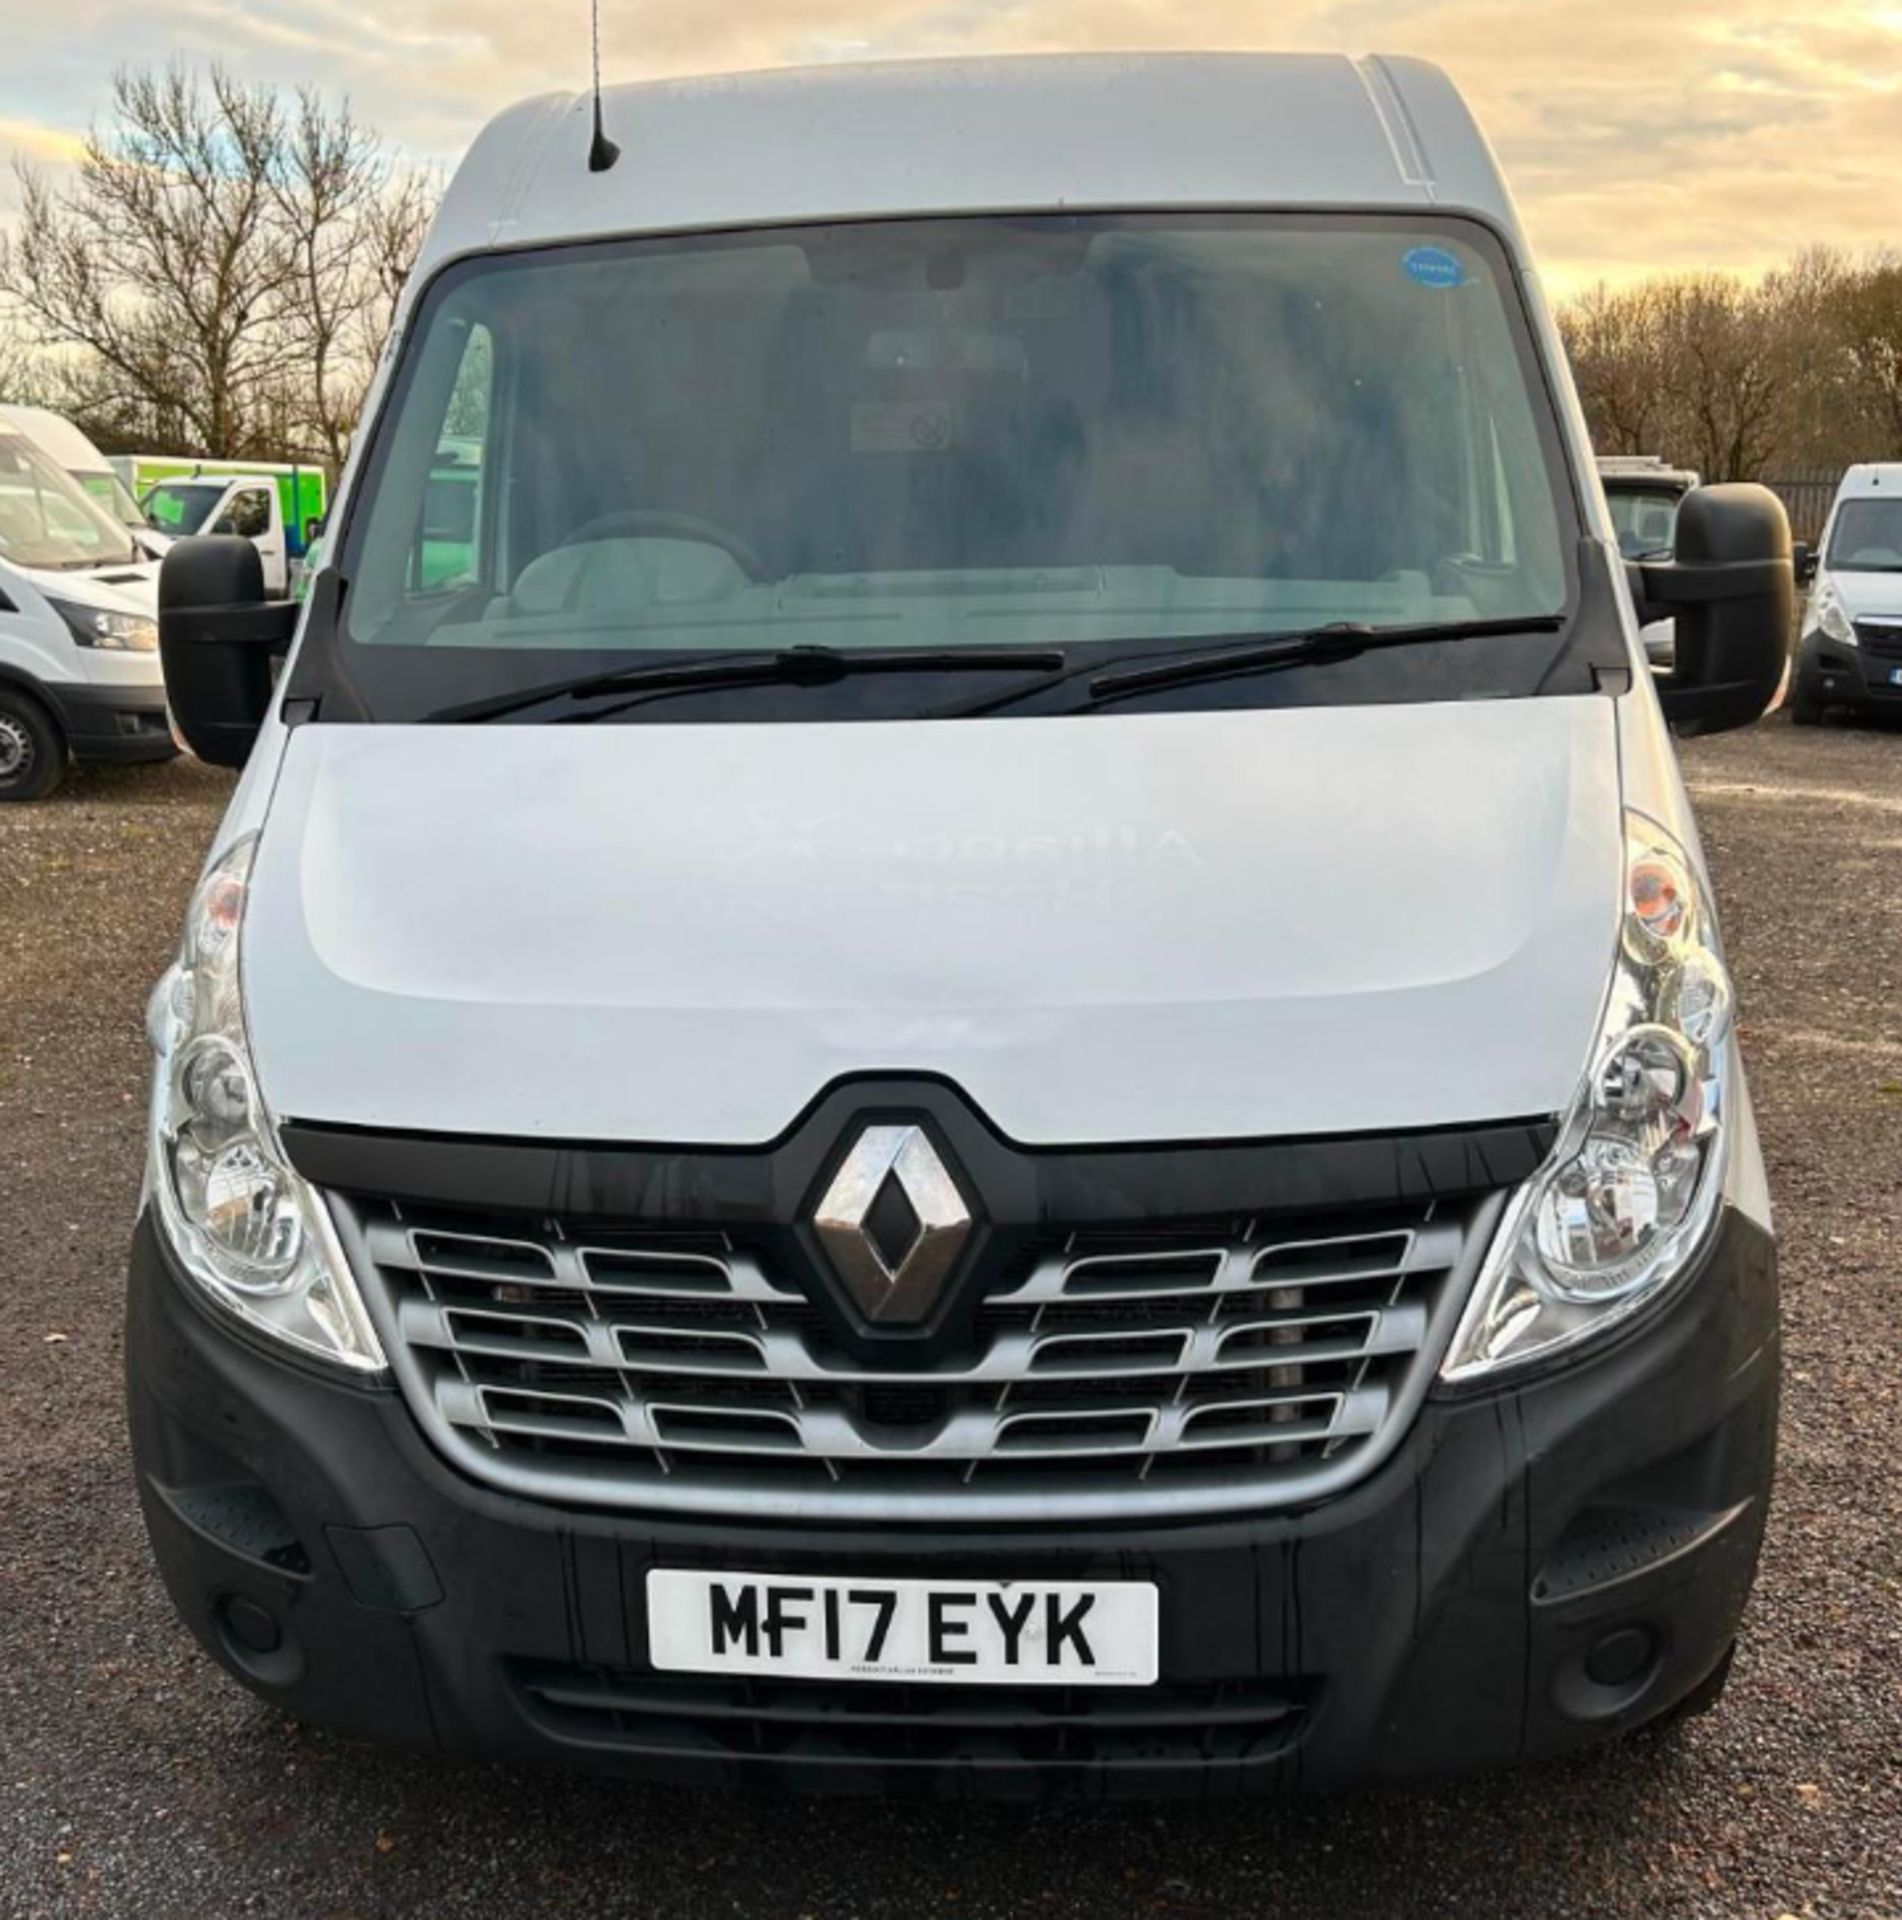 "HEALTHCARE CARGO CARRIER: 2017 RENAULT MASTER BUSINESS EXTRA" - Image 14 of 14